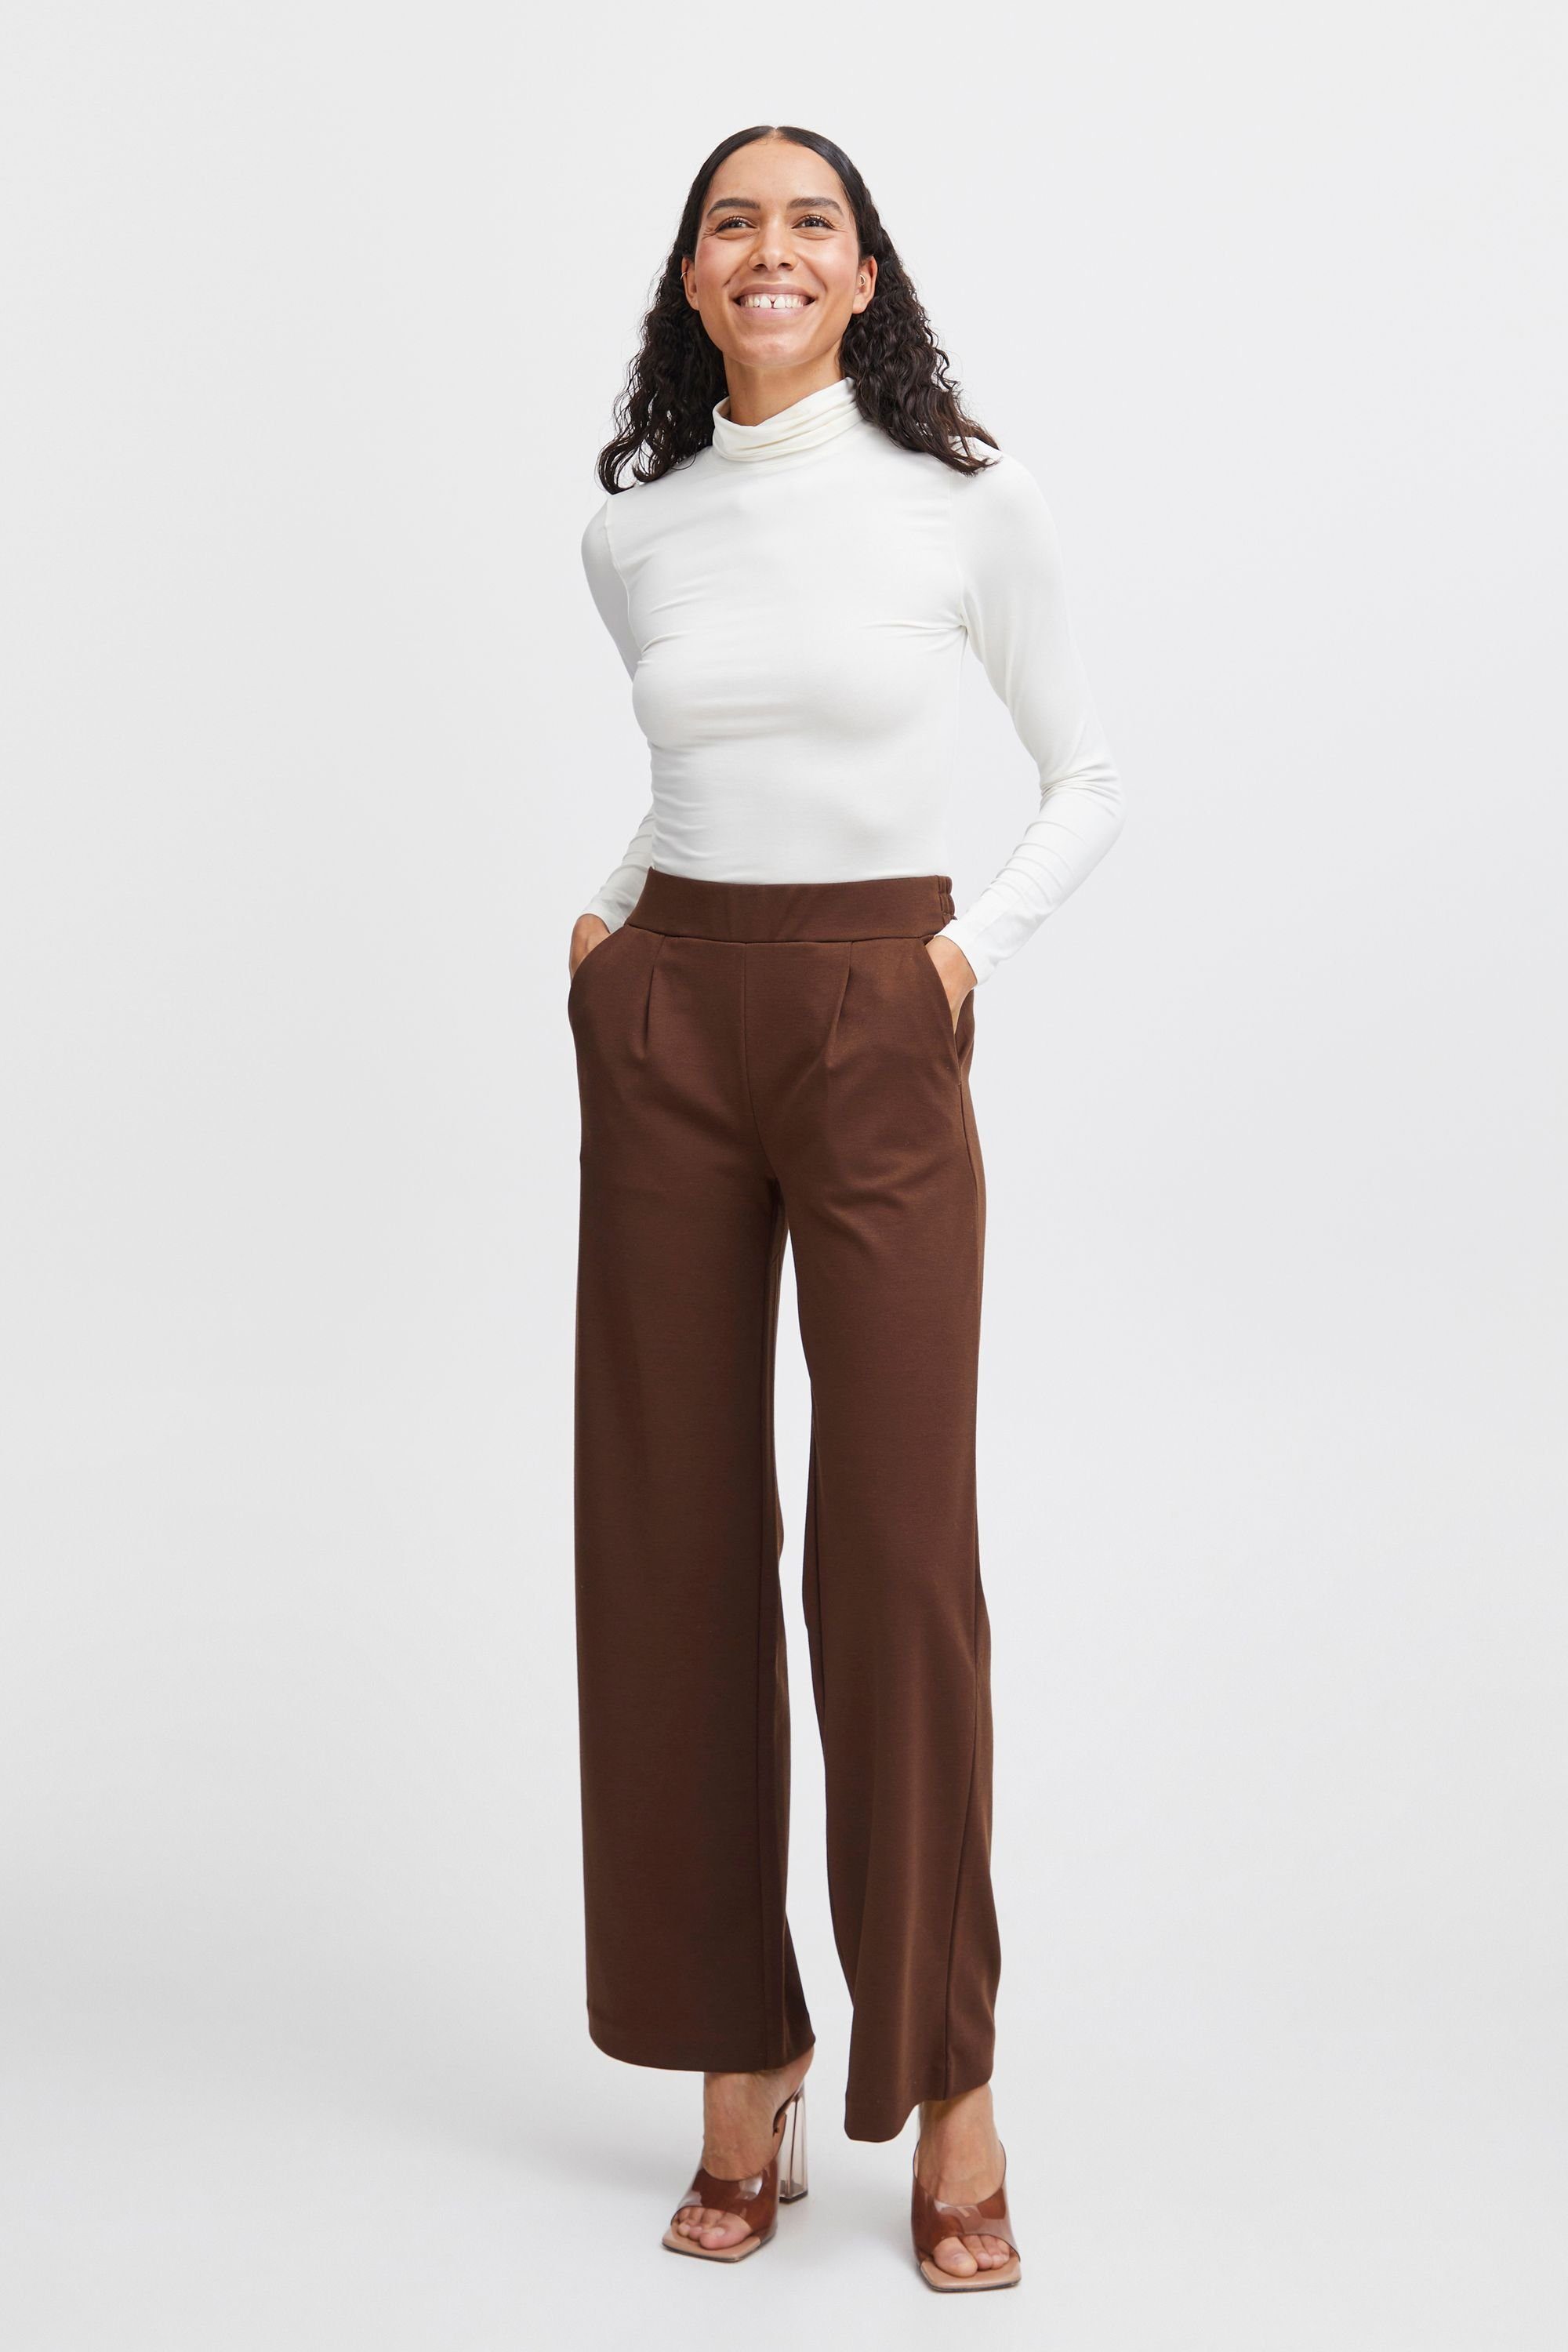 b.young Stoffhose BYRIZETTA 2 20812847 Coffee - (191419) 2 WIDE Chicory PANTS